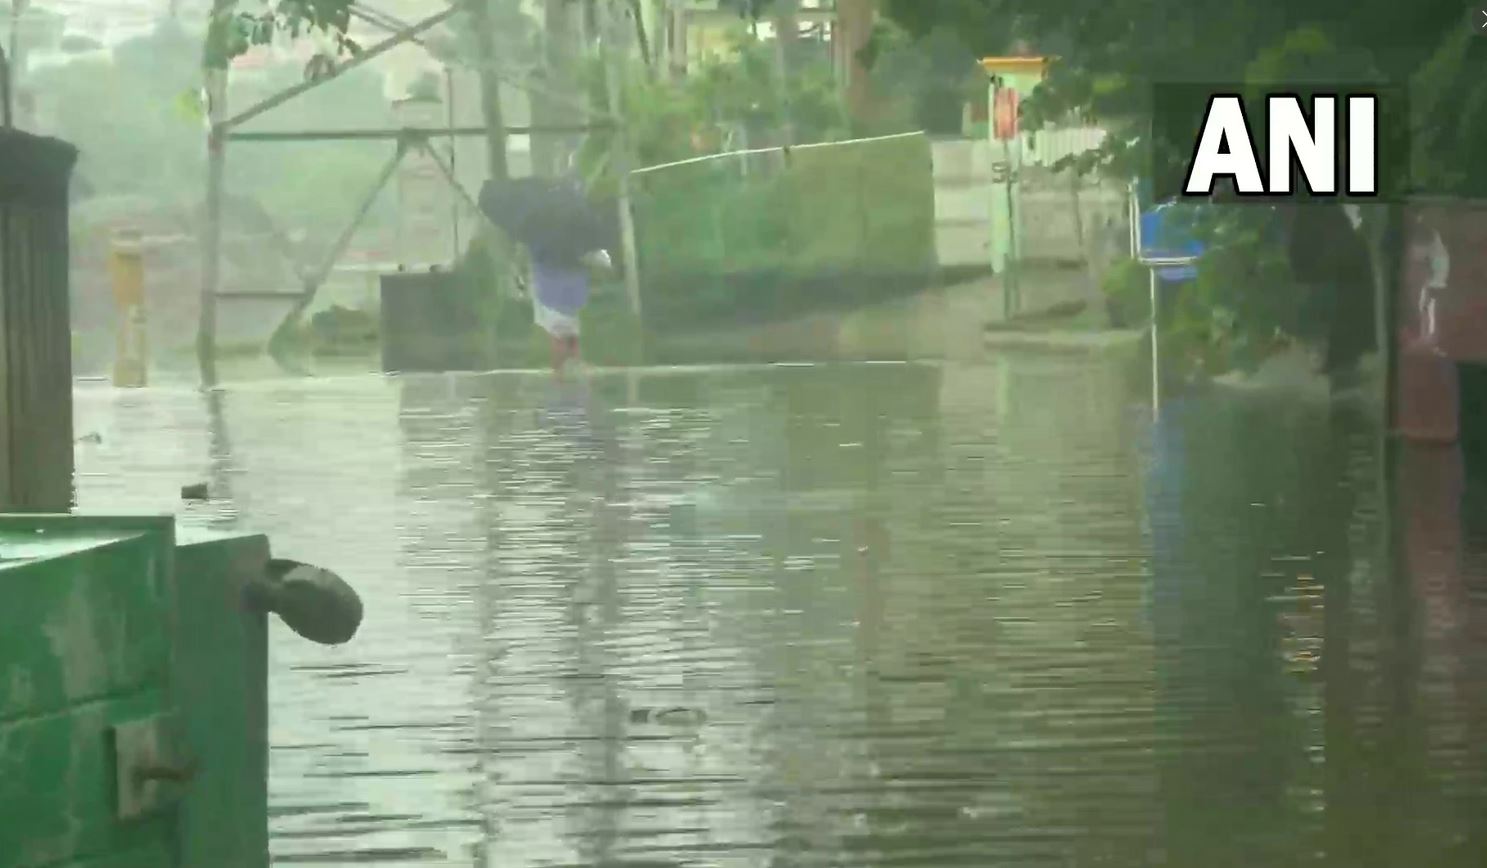 Intense rains in Chennai after years